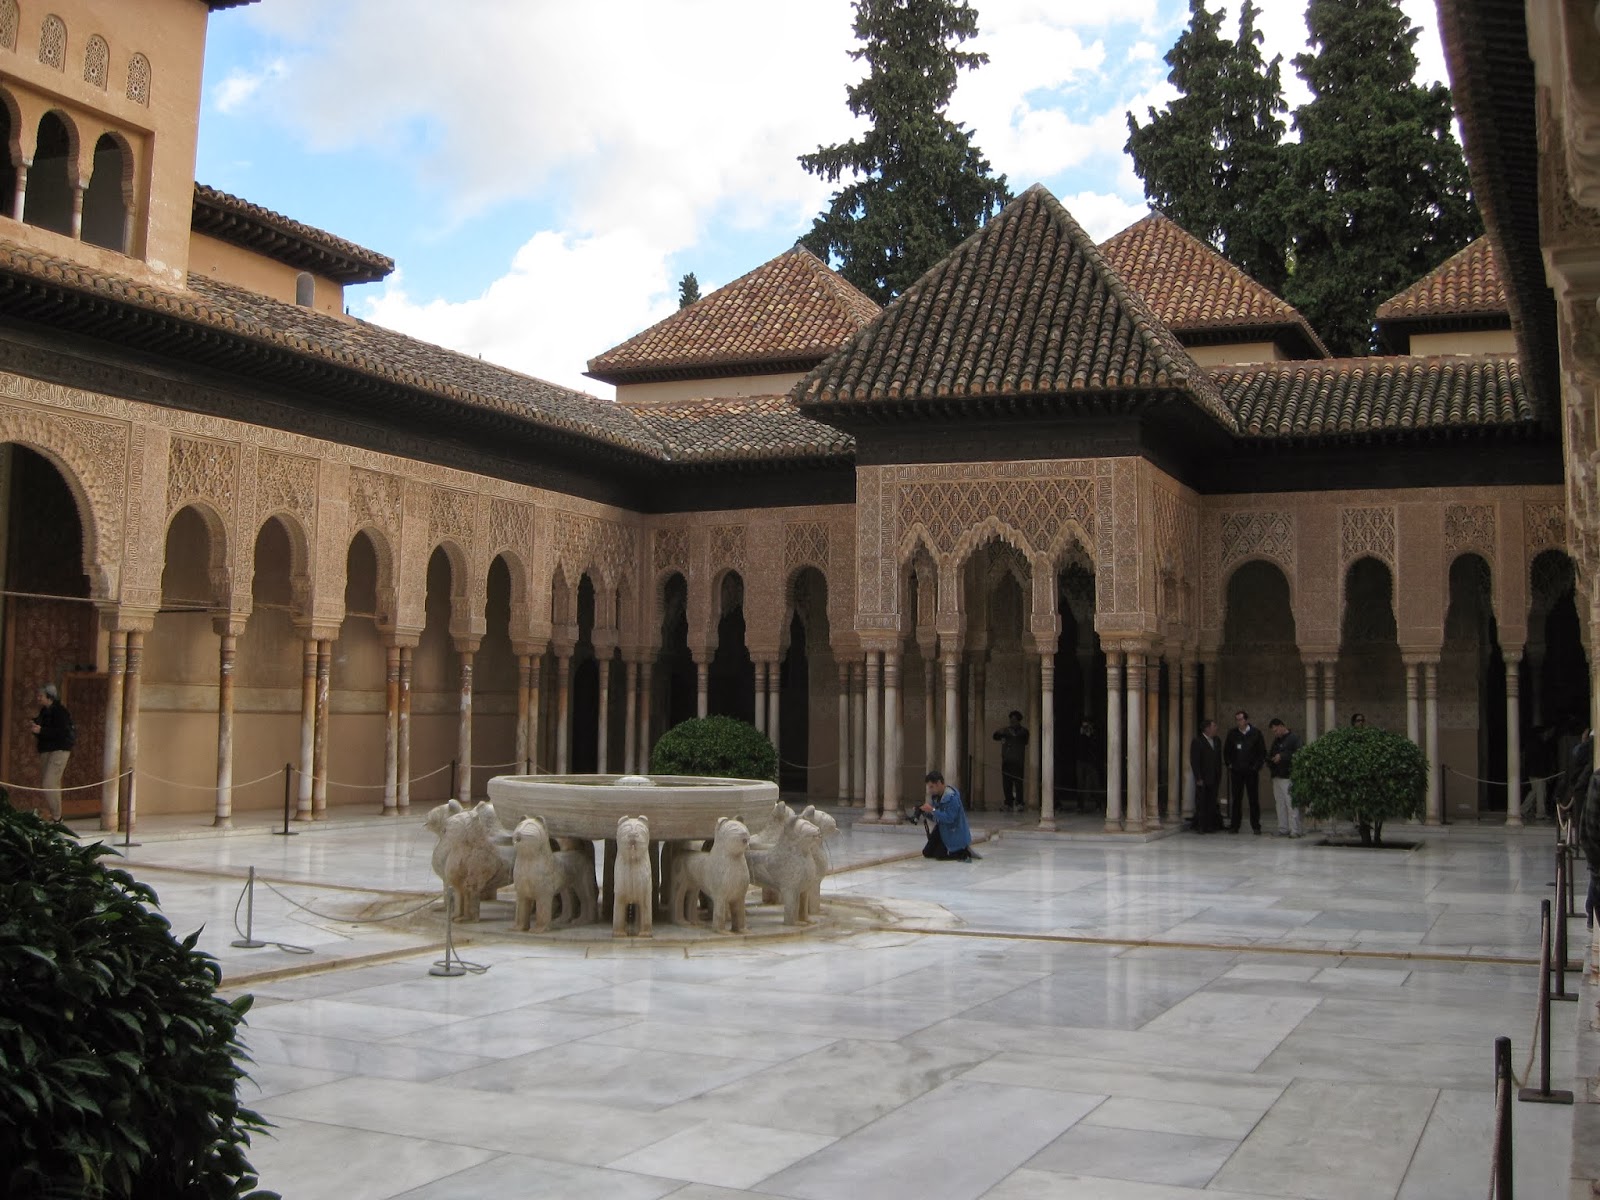 Granada - The Court of the Lions